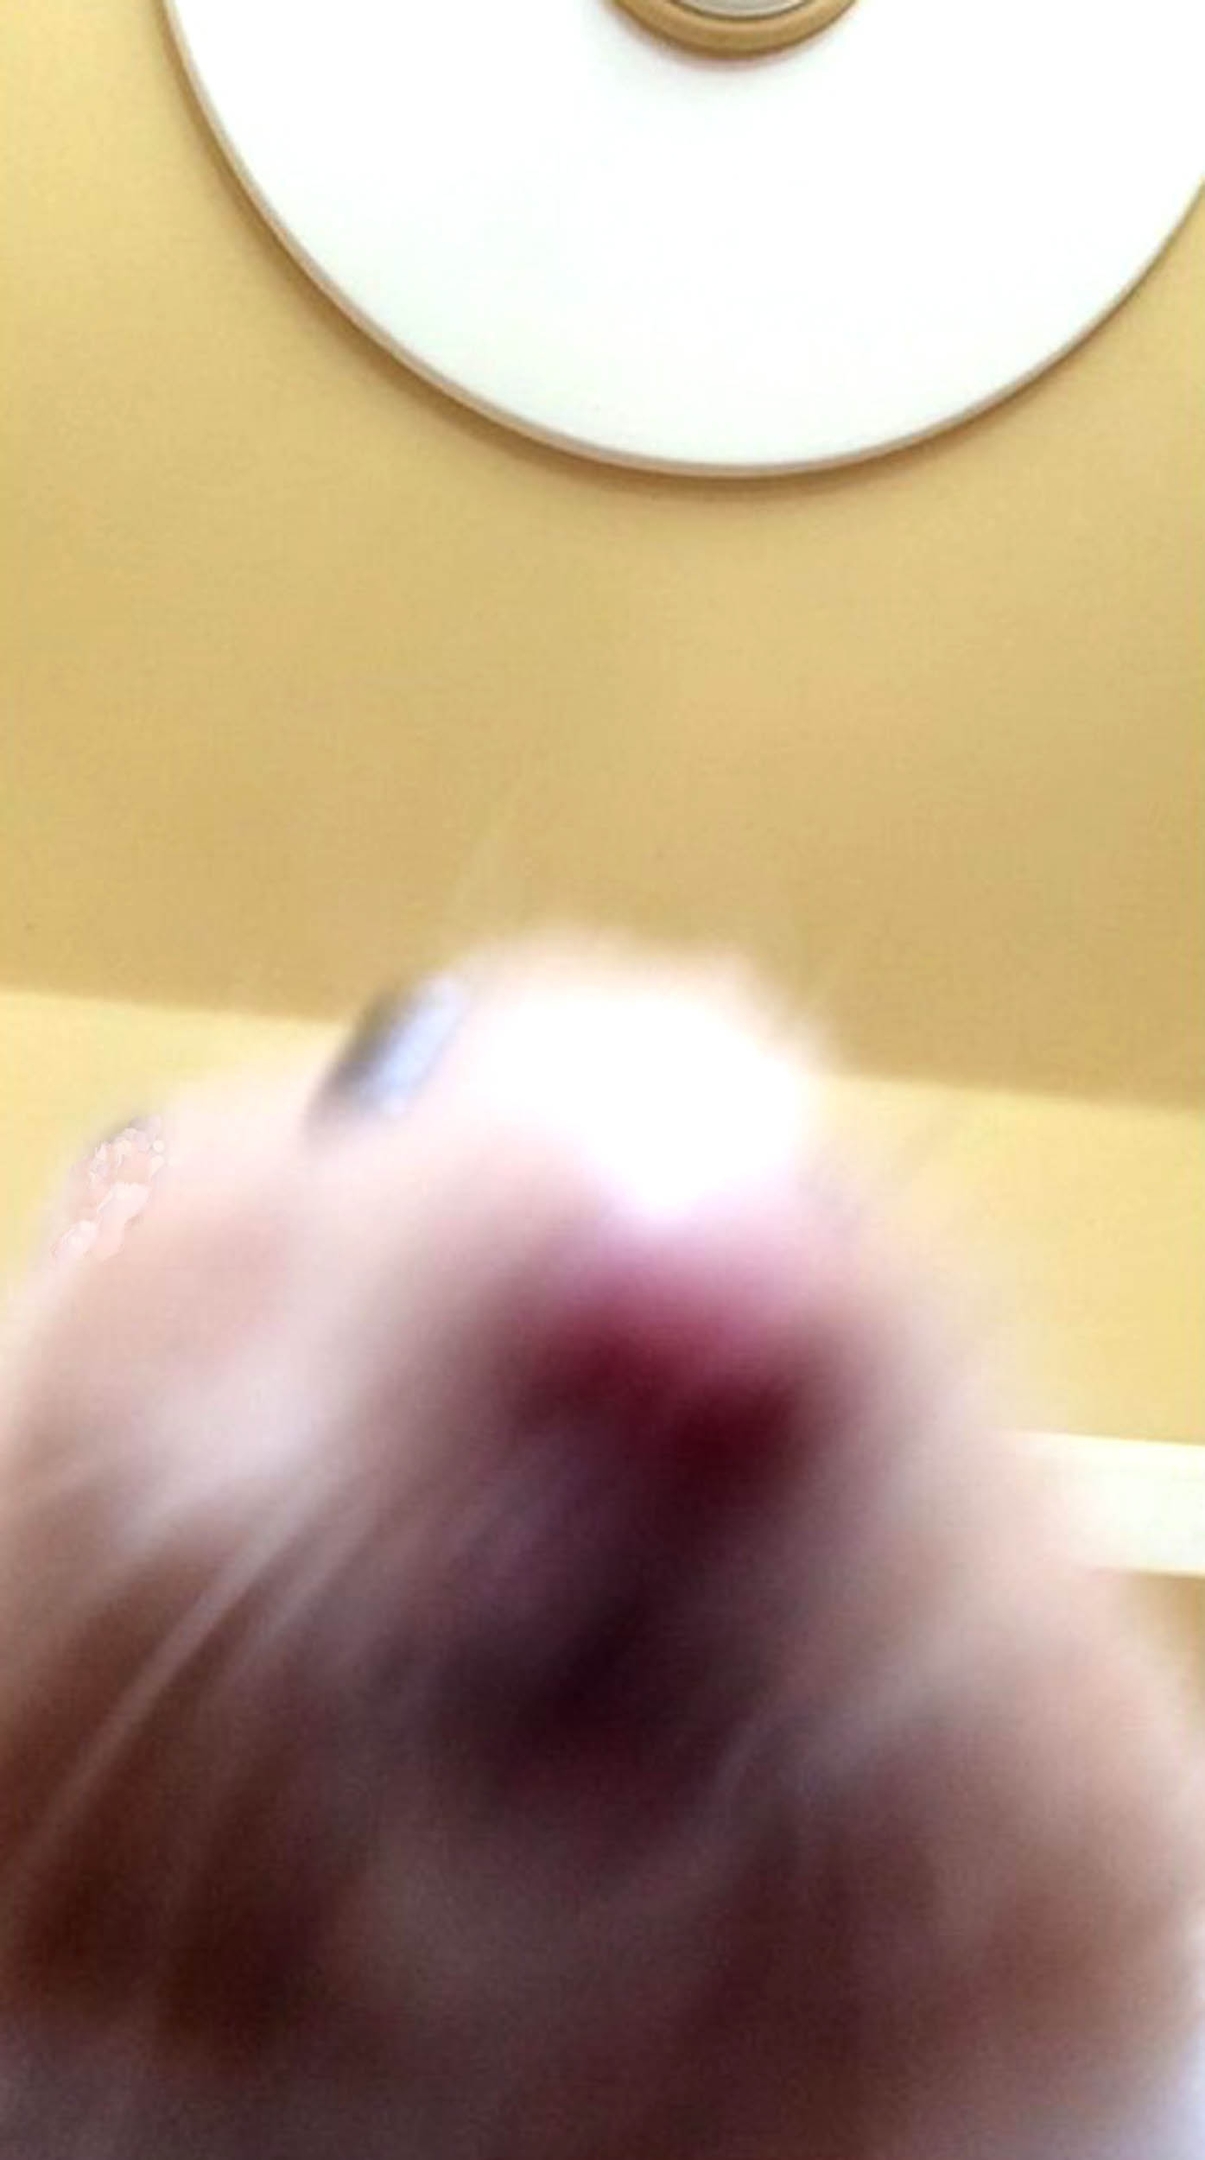 Hamster walks on mobile PETS across the globe are getting in on the selfie phenomenon. Curious cats, dopey dogs and even ham-fisted hamsters are snapping themselves on their owners mobiles - with hilarious results. The pictures, which include a close-up of a one-eyed cat, all were produced when clumsy pets stood on their owners phones or iPads. The results are varied - some pictures show cats looking down into the camera with their chin appearing extremely enlarged, and in others a dogs nose takes up most of the photo.